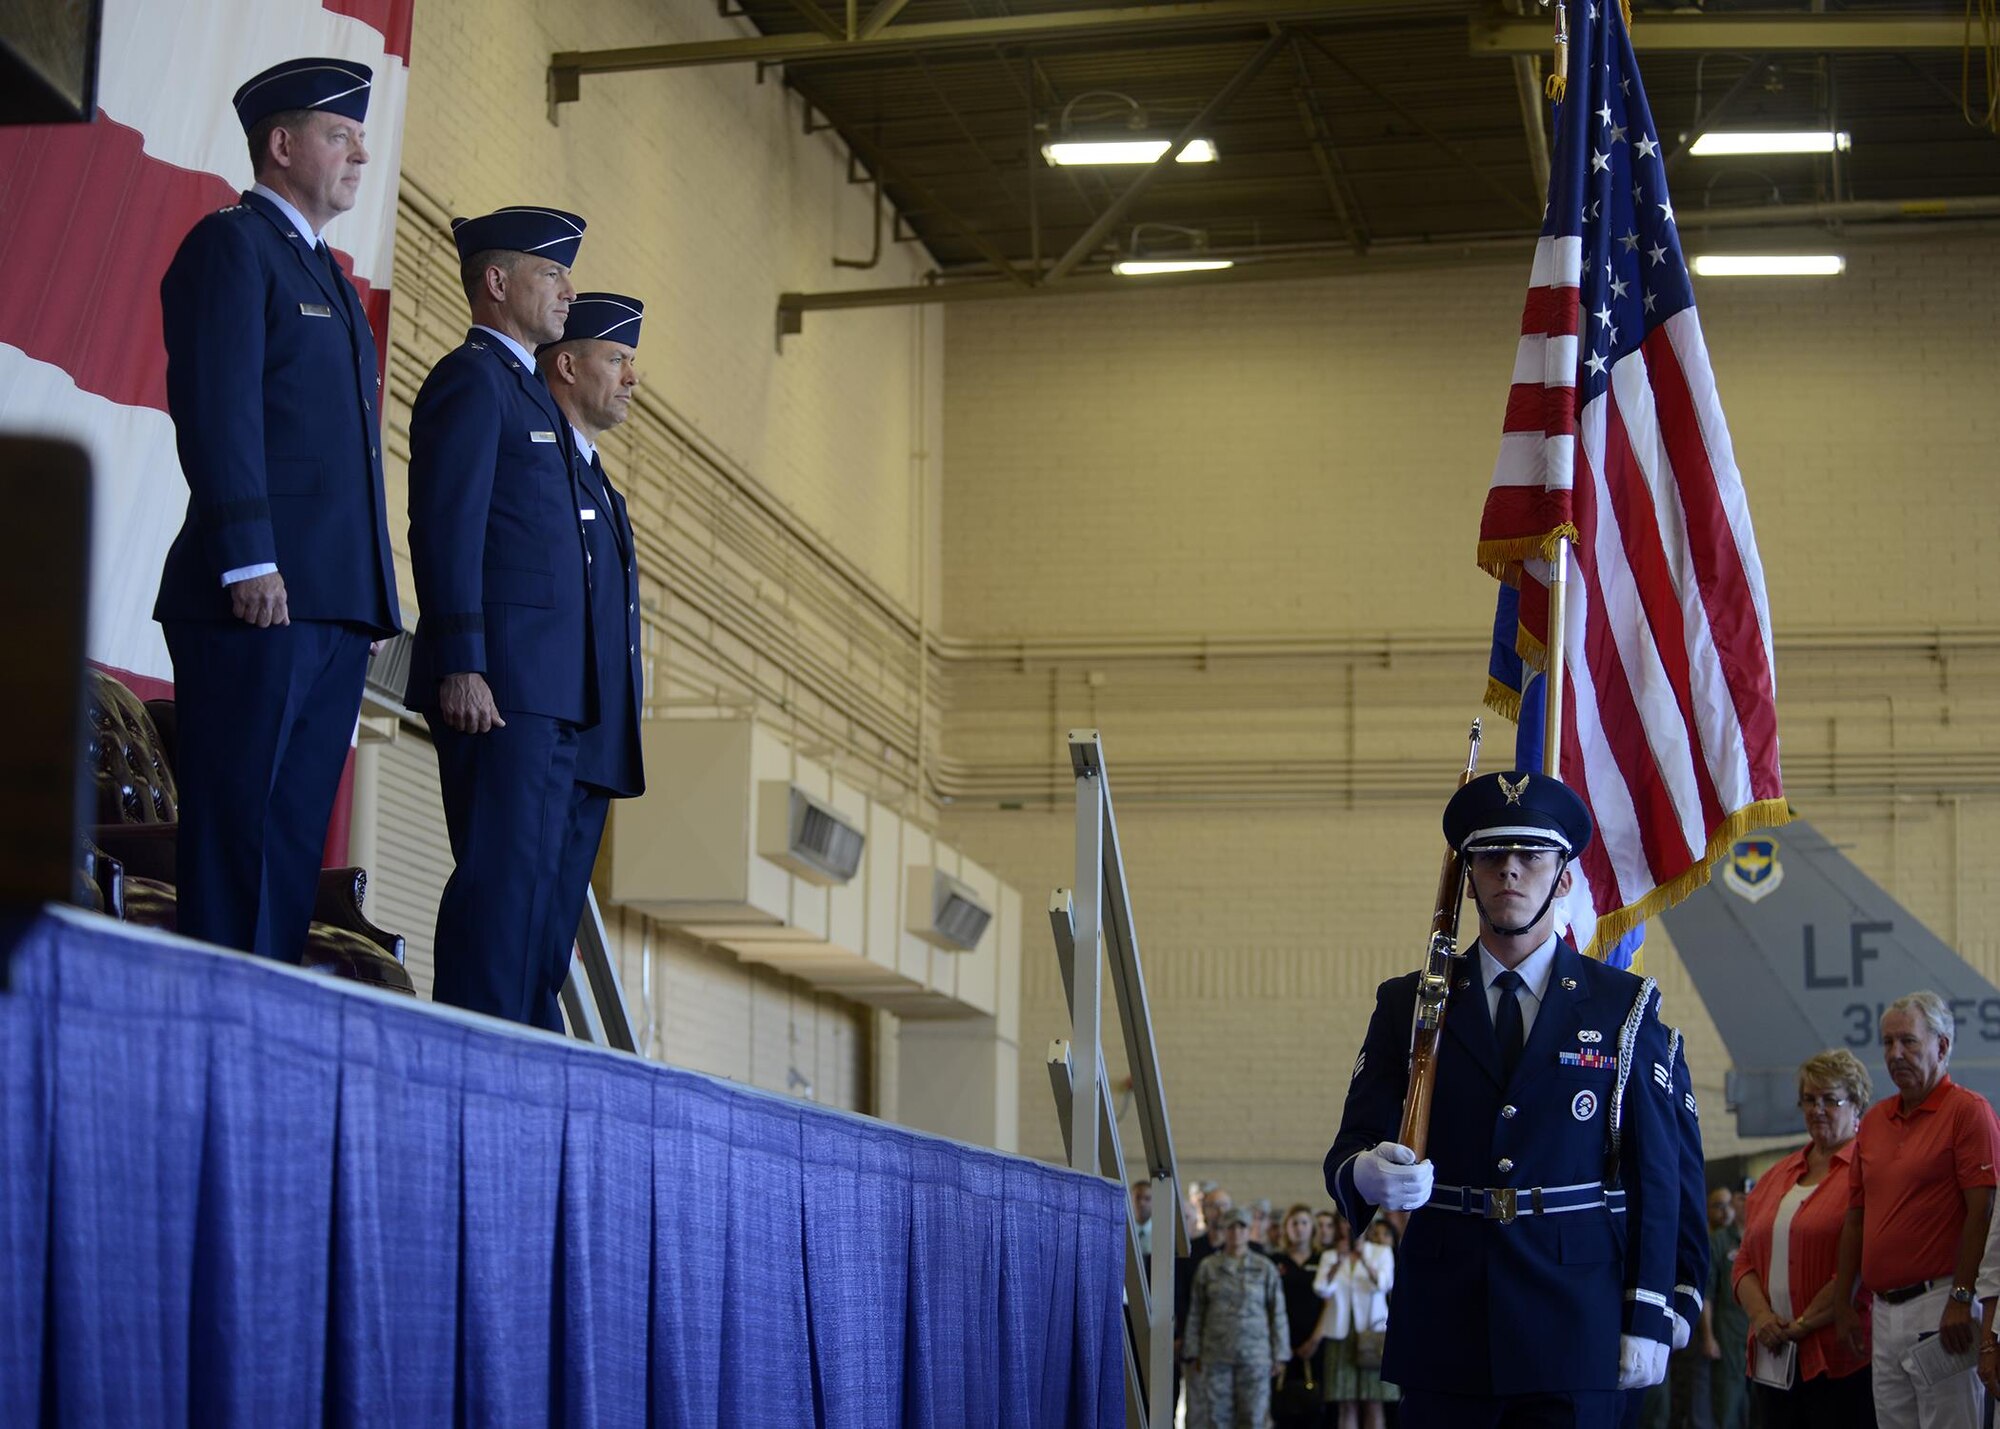 Members of the Luke Air Force Base honor guard prepare to present the colors during the 56th Fighter Wing Change of Command ceremony July 13, 2016 at Luke Air Force Base, Ariz. (U.S. Air Force photo by Senior Airman Devante Williams)